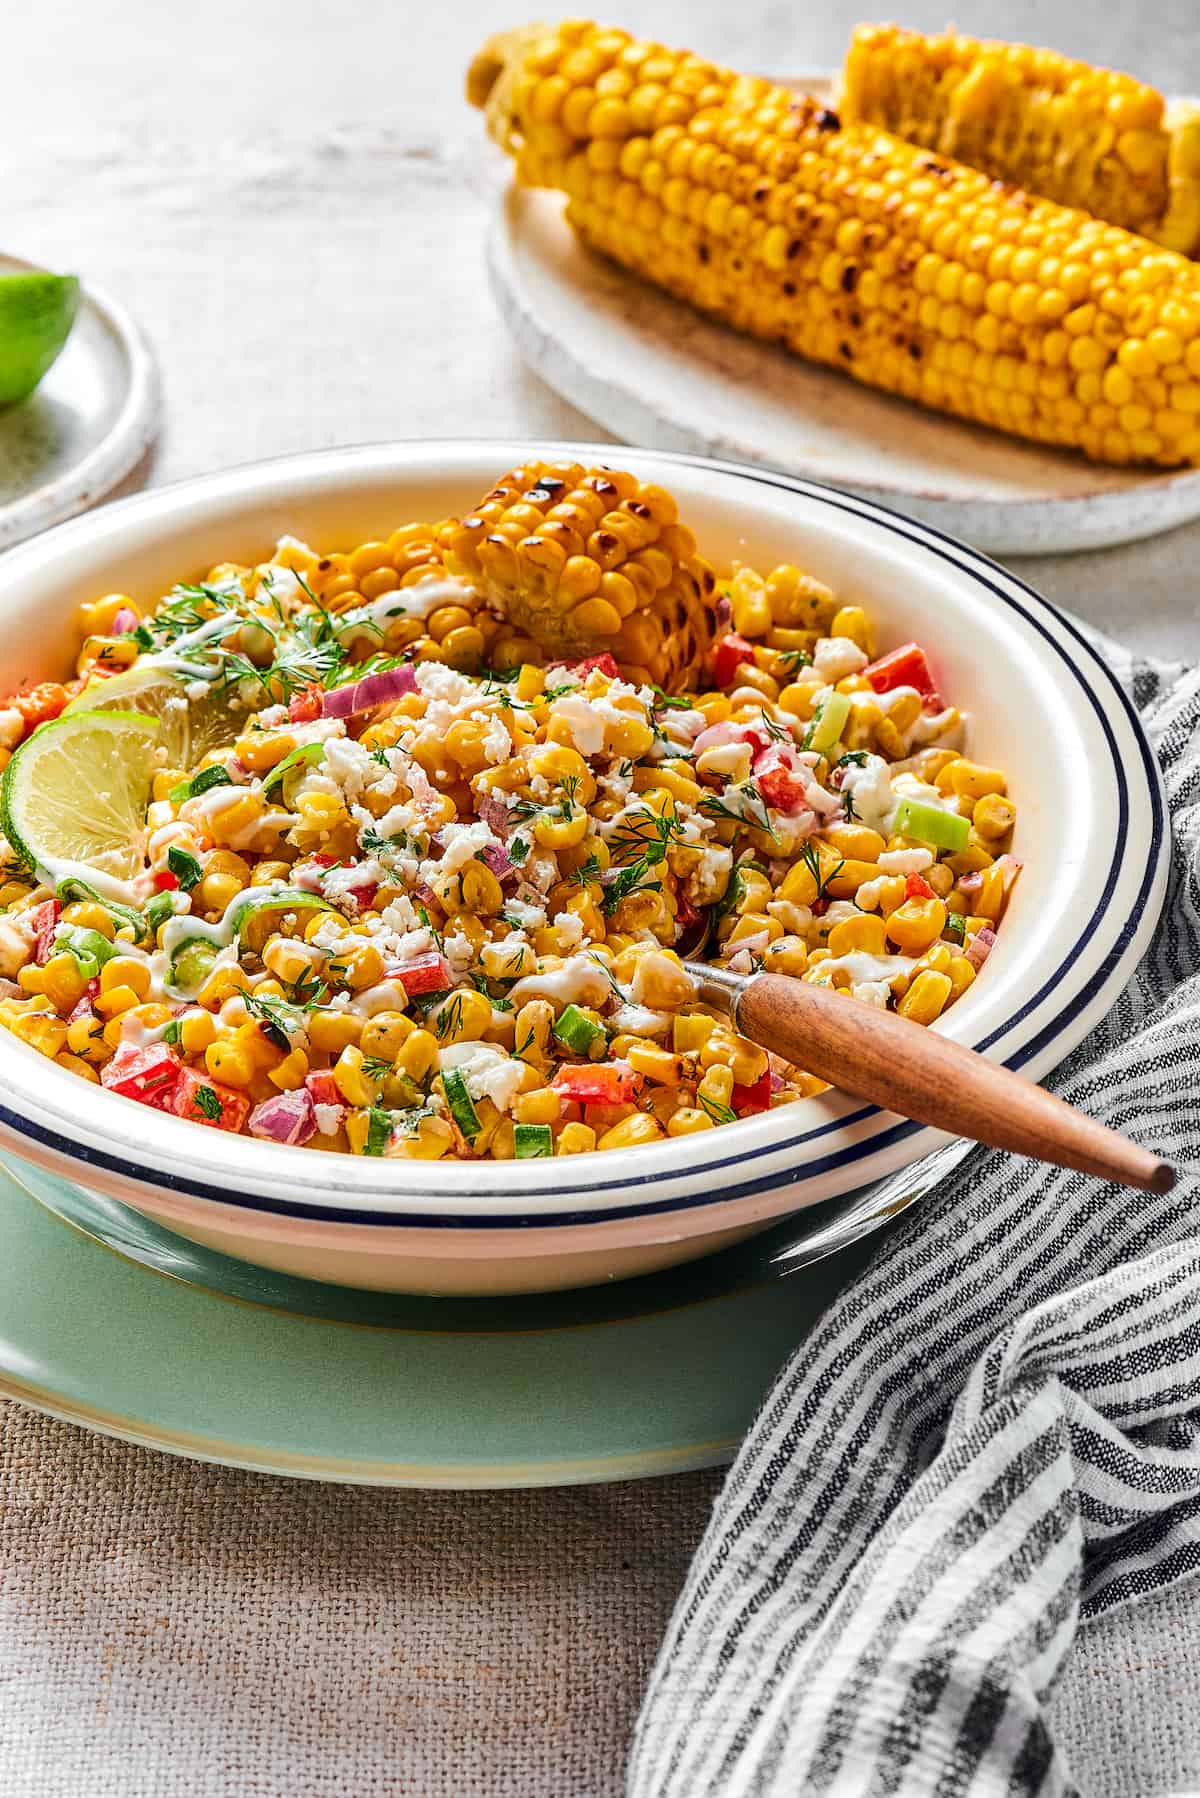 Elote salad in a bowl with a wooden-handled spoon.